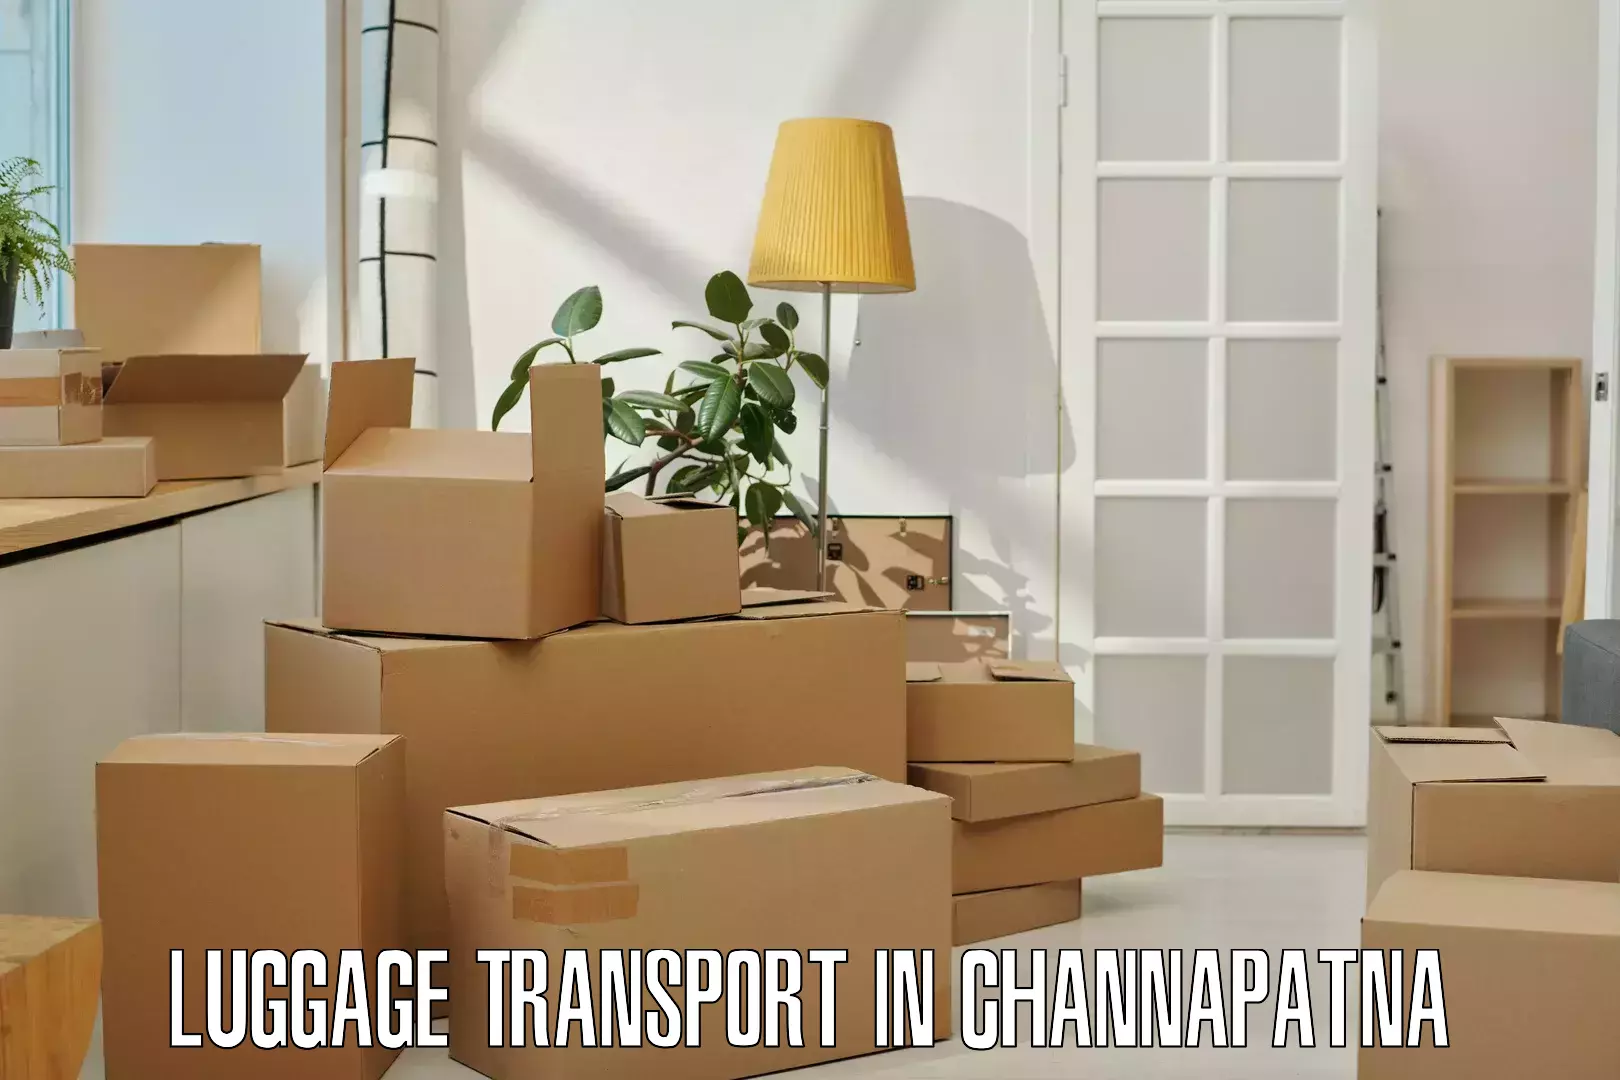 Luggage transfer service in Channapatna